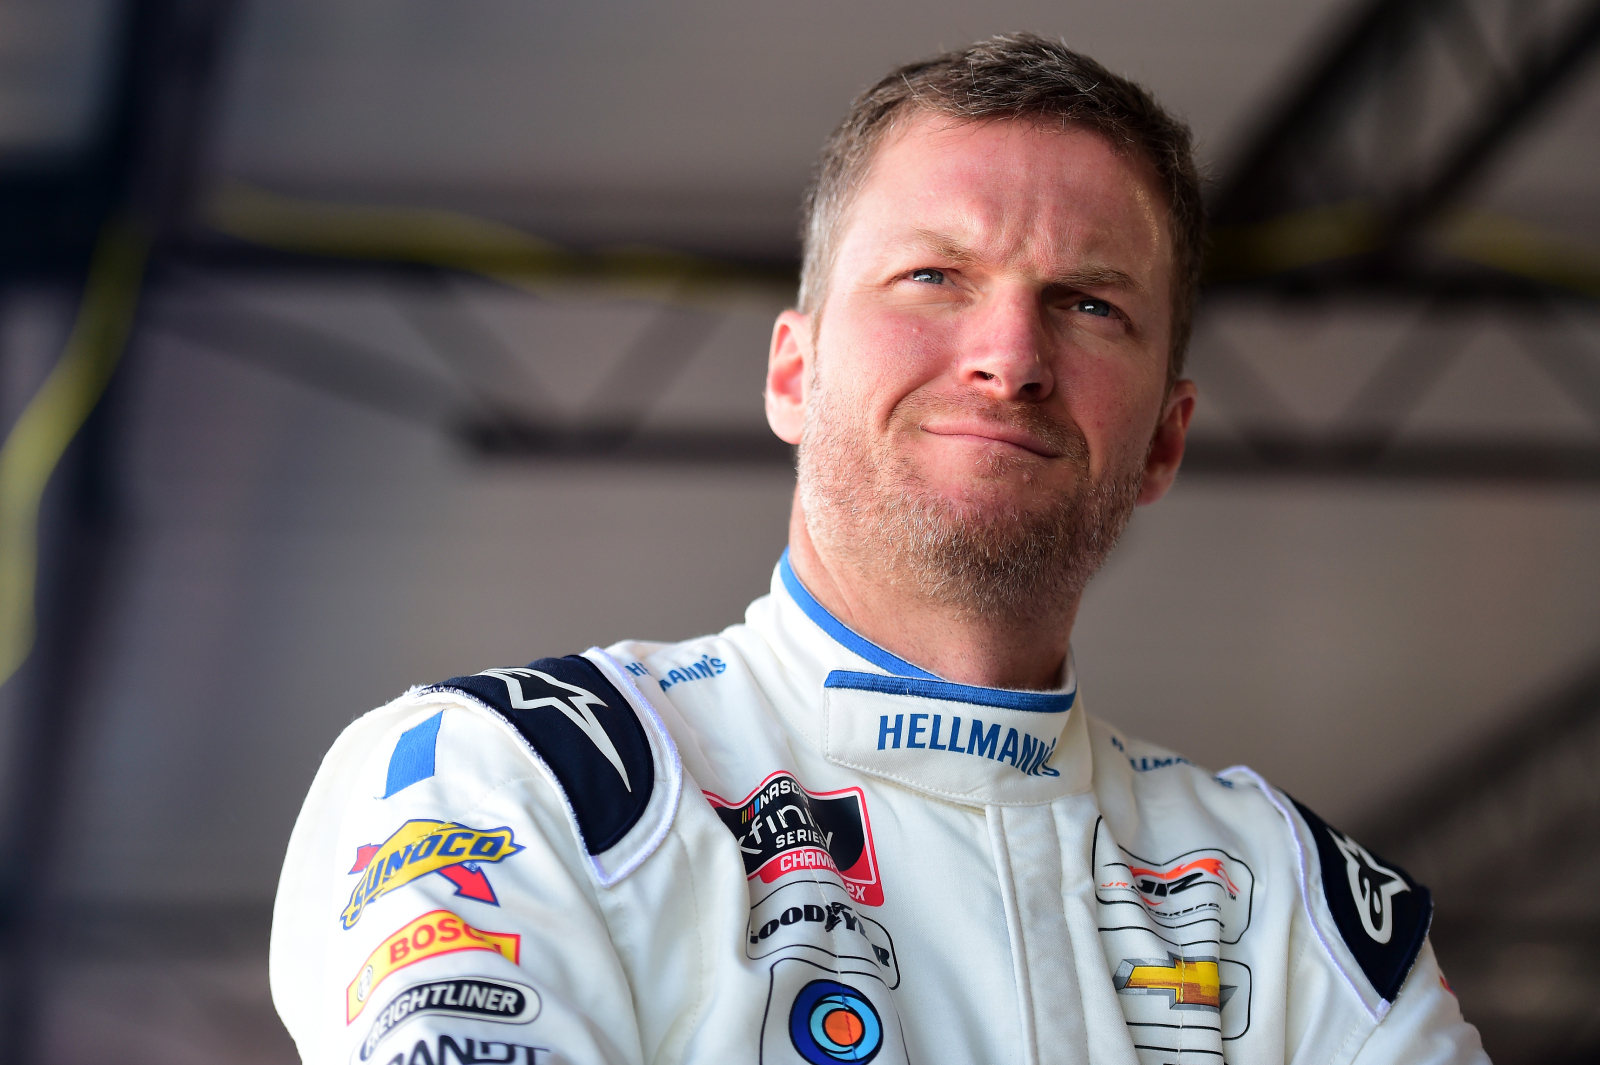 Dale Earnhardt Jr. is a NASCAR legend. He has stayed involved in racing since retiring as a full-time driver, too. Now, he has a new gig.